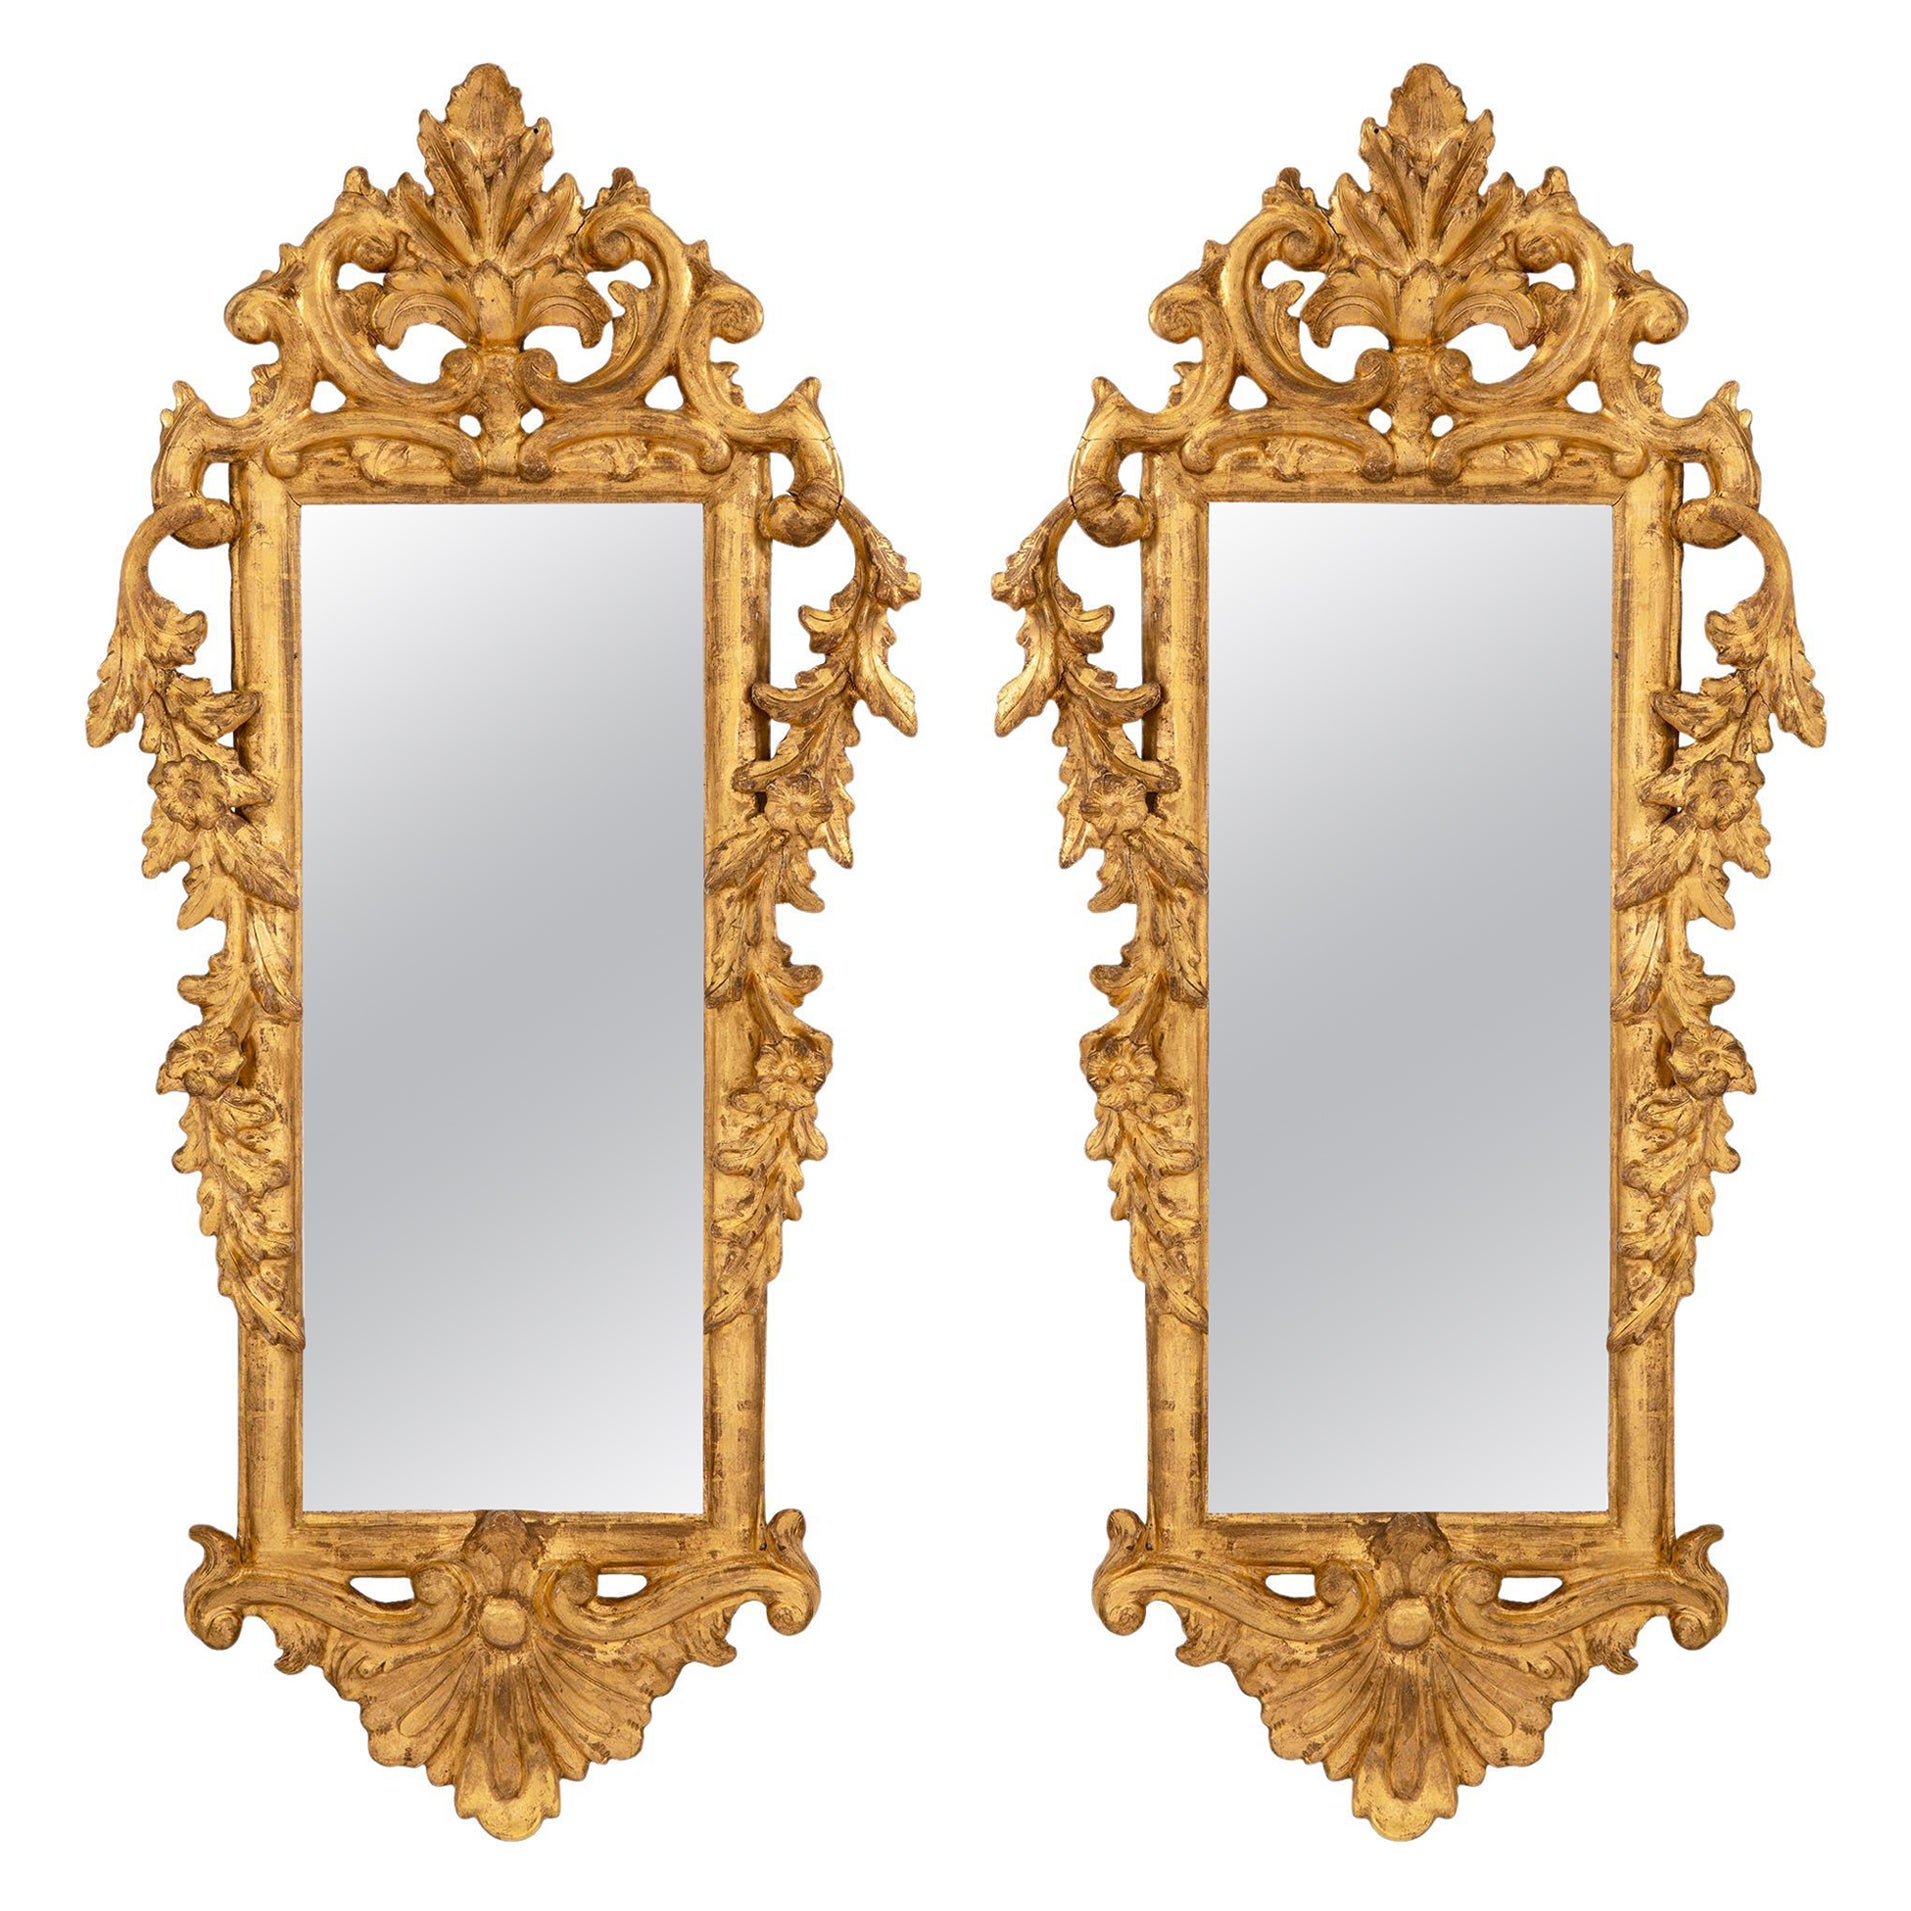 Pair of Italian 18th Century Rococo Style Giltwood Mirrors For Sale